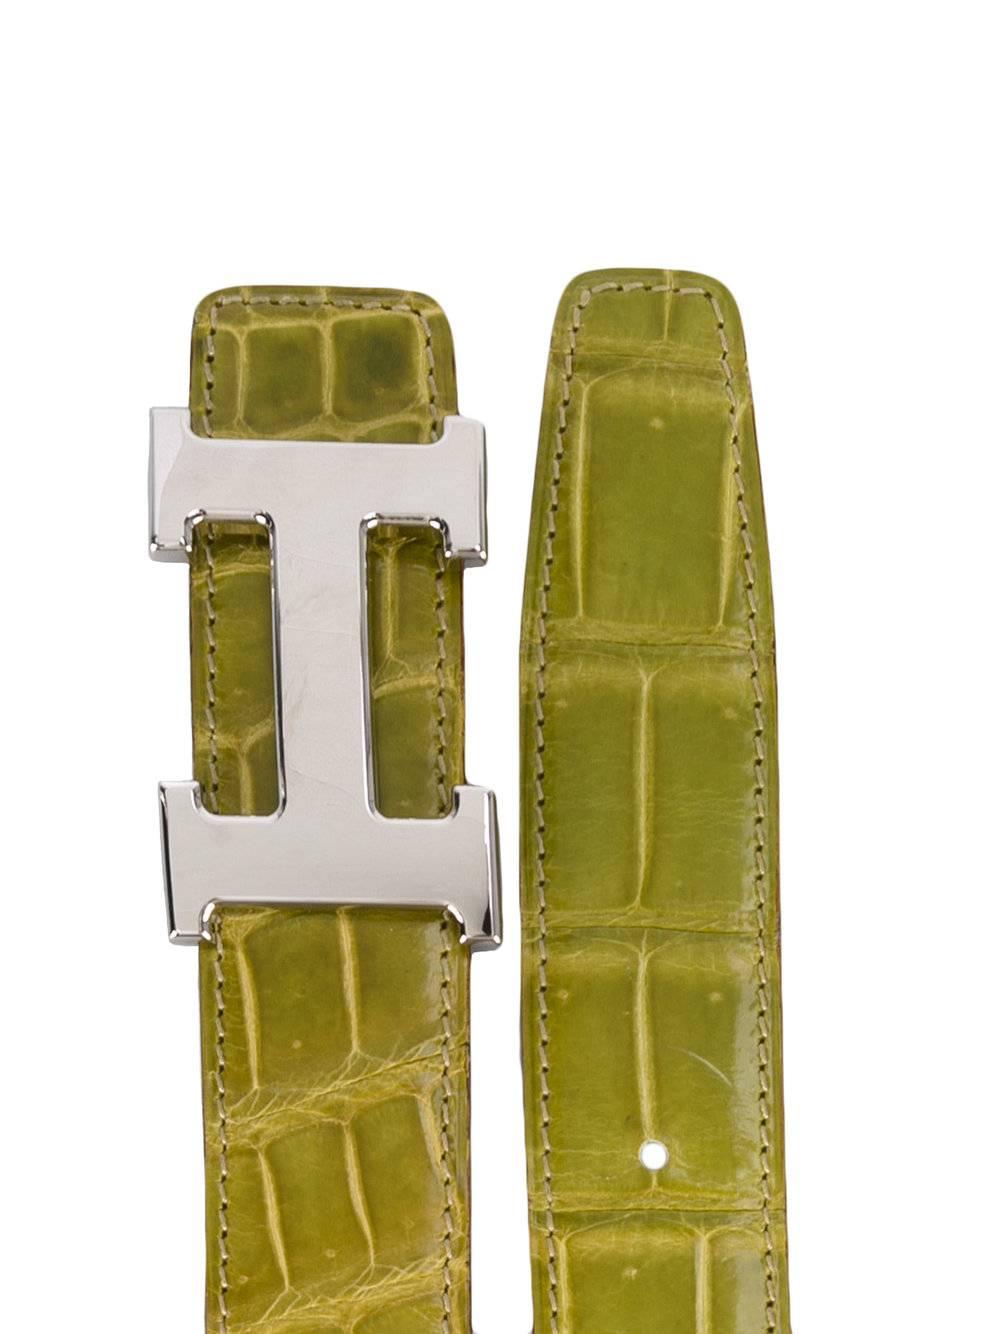 Lively Hermès belt in green crocodile leather and metal. It features punch holes in the green leather, and presenting a broad silver-tone H logo as buckle. This item was made in 2005 and is in excellent conditions, it only shows some light signs of